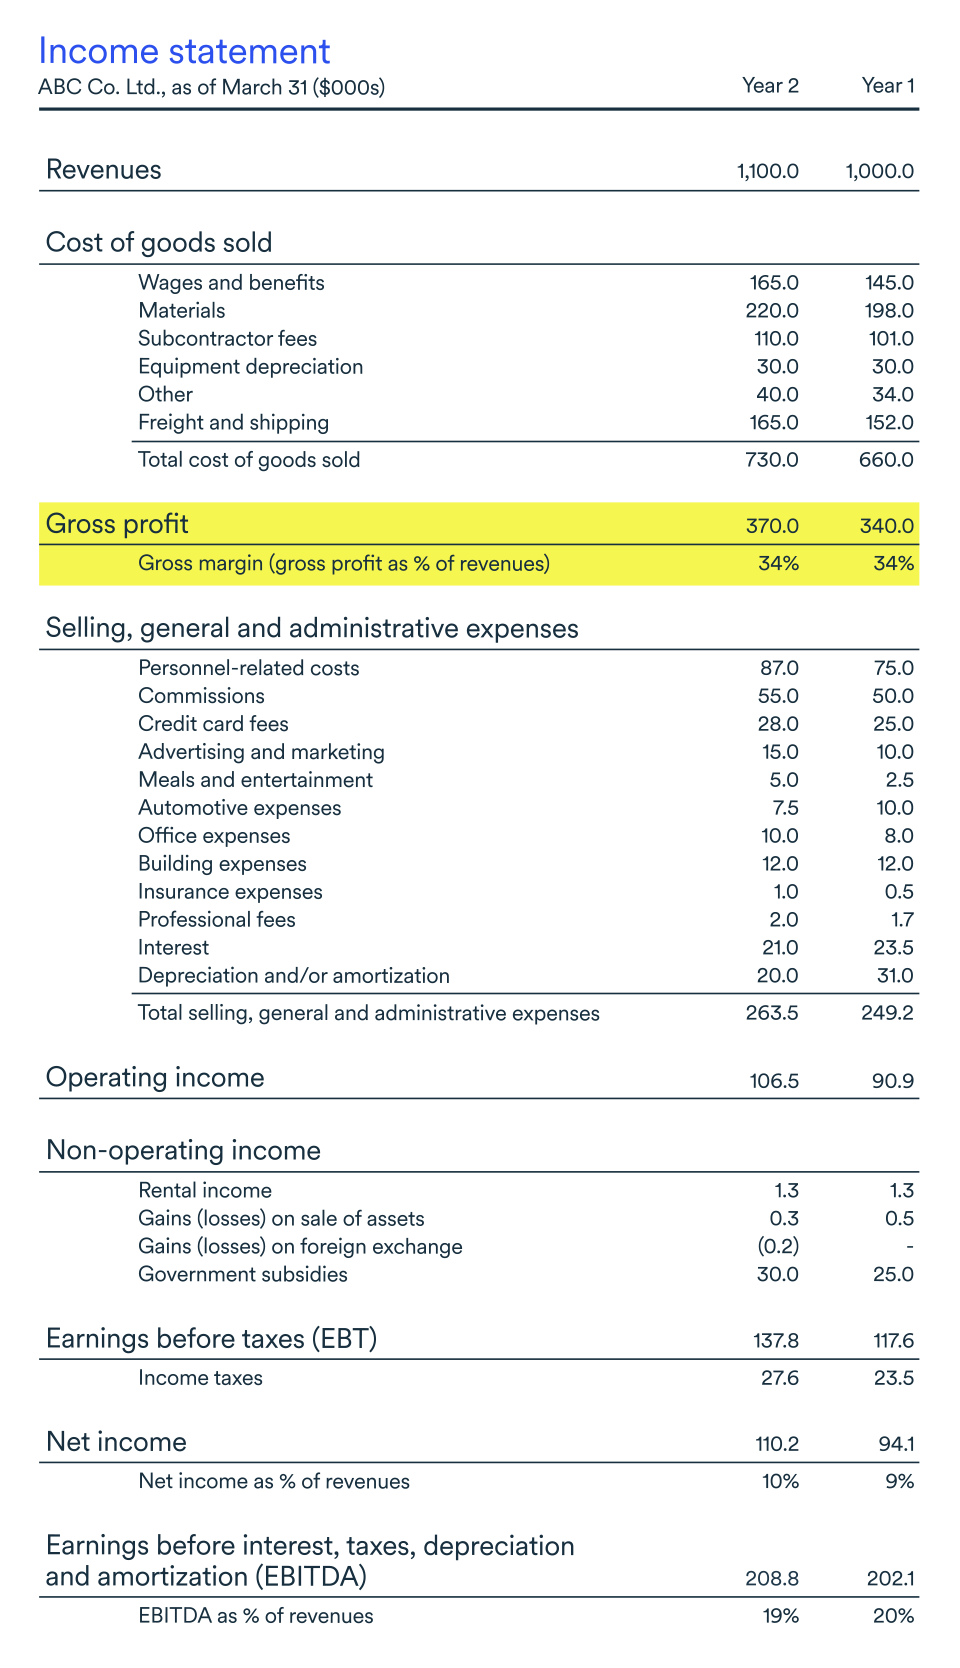 Example of an Income statement with focus on Gross Margin